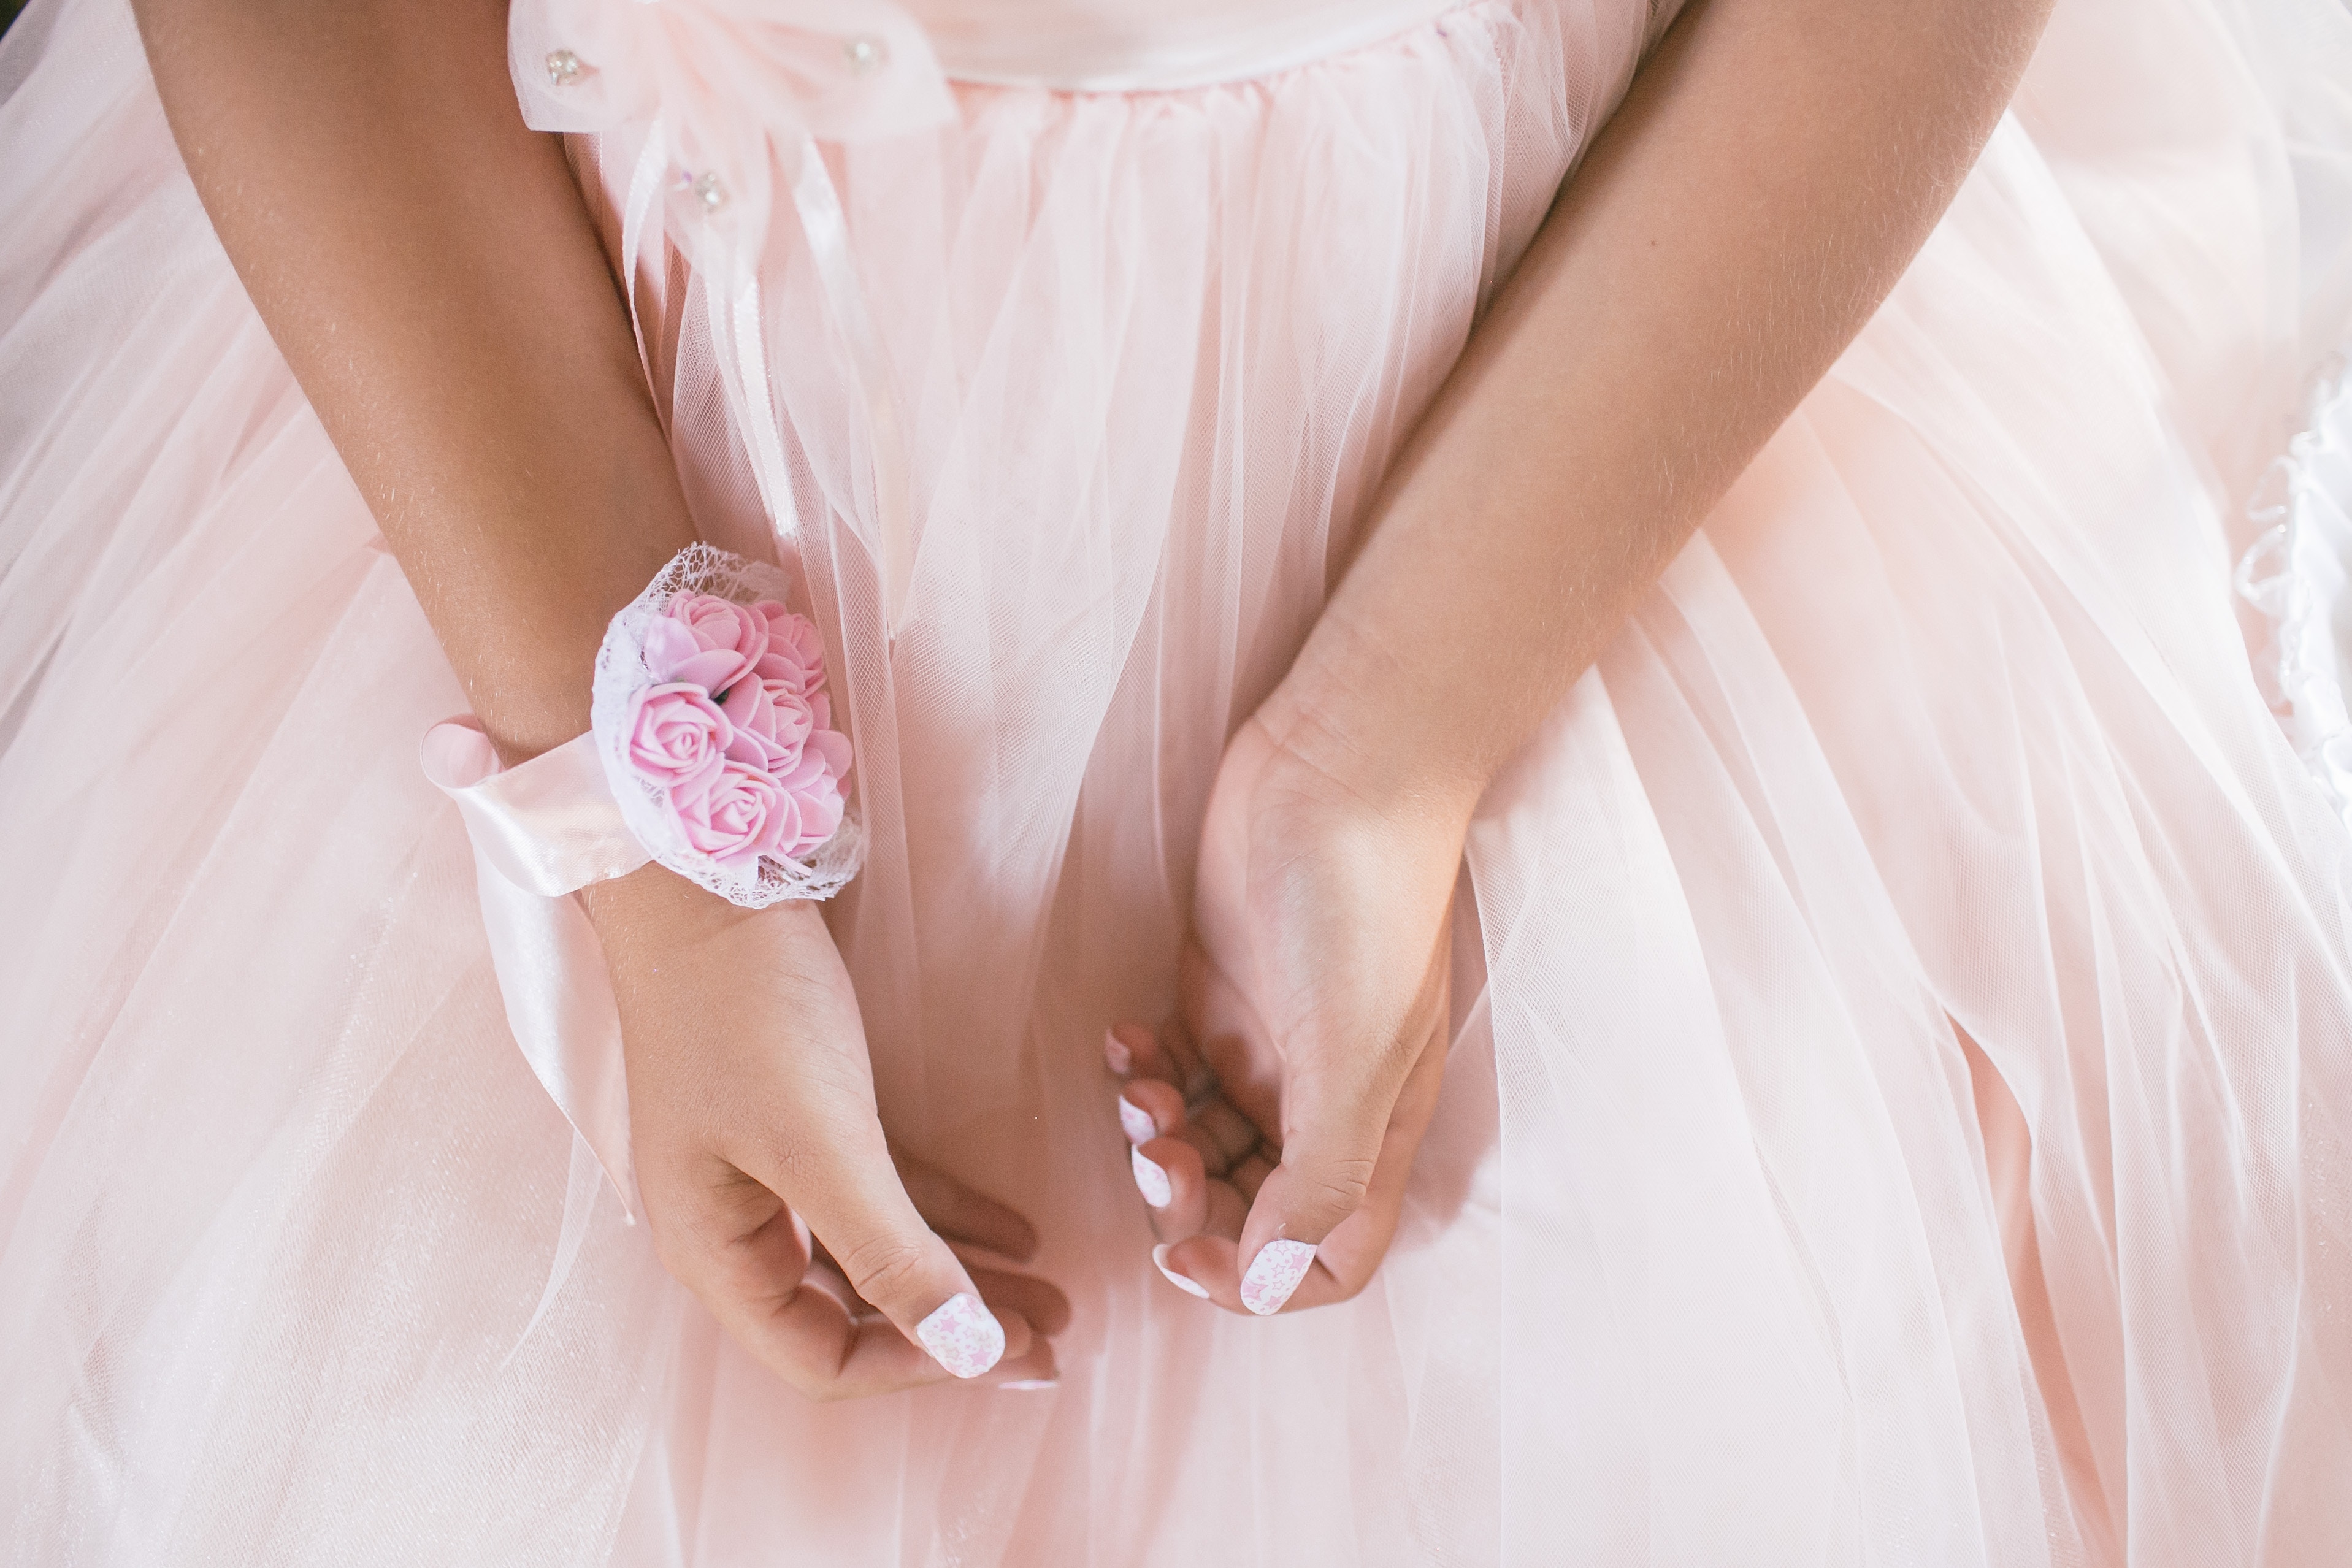 5-reasons-id-have-loved-to-have-gone-to-prom